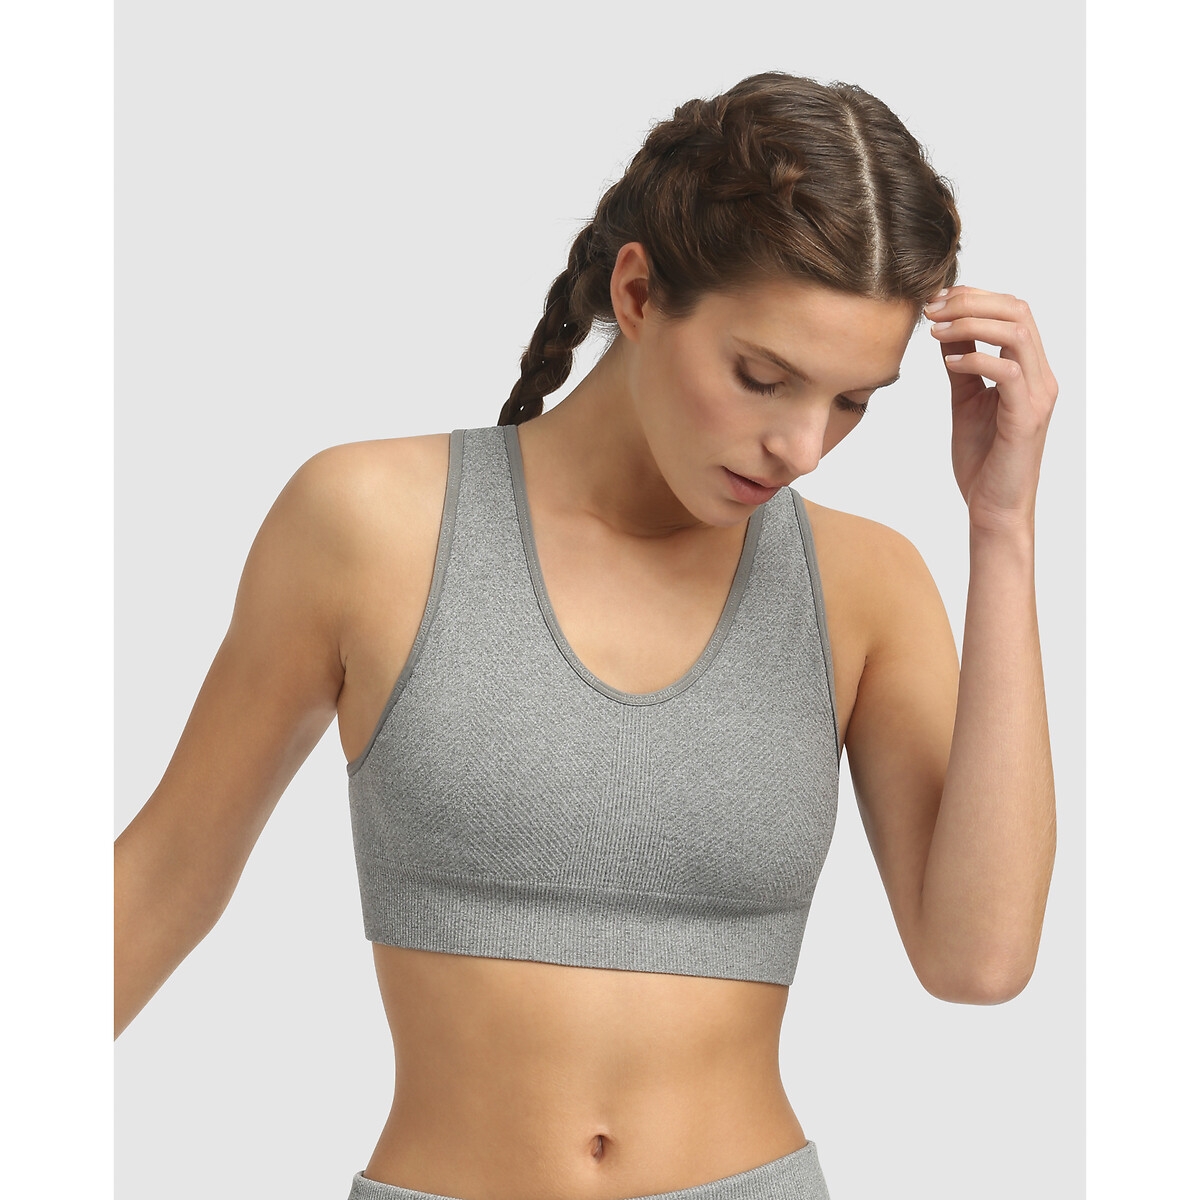 Padded Sports Bra for Moderate Impact